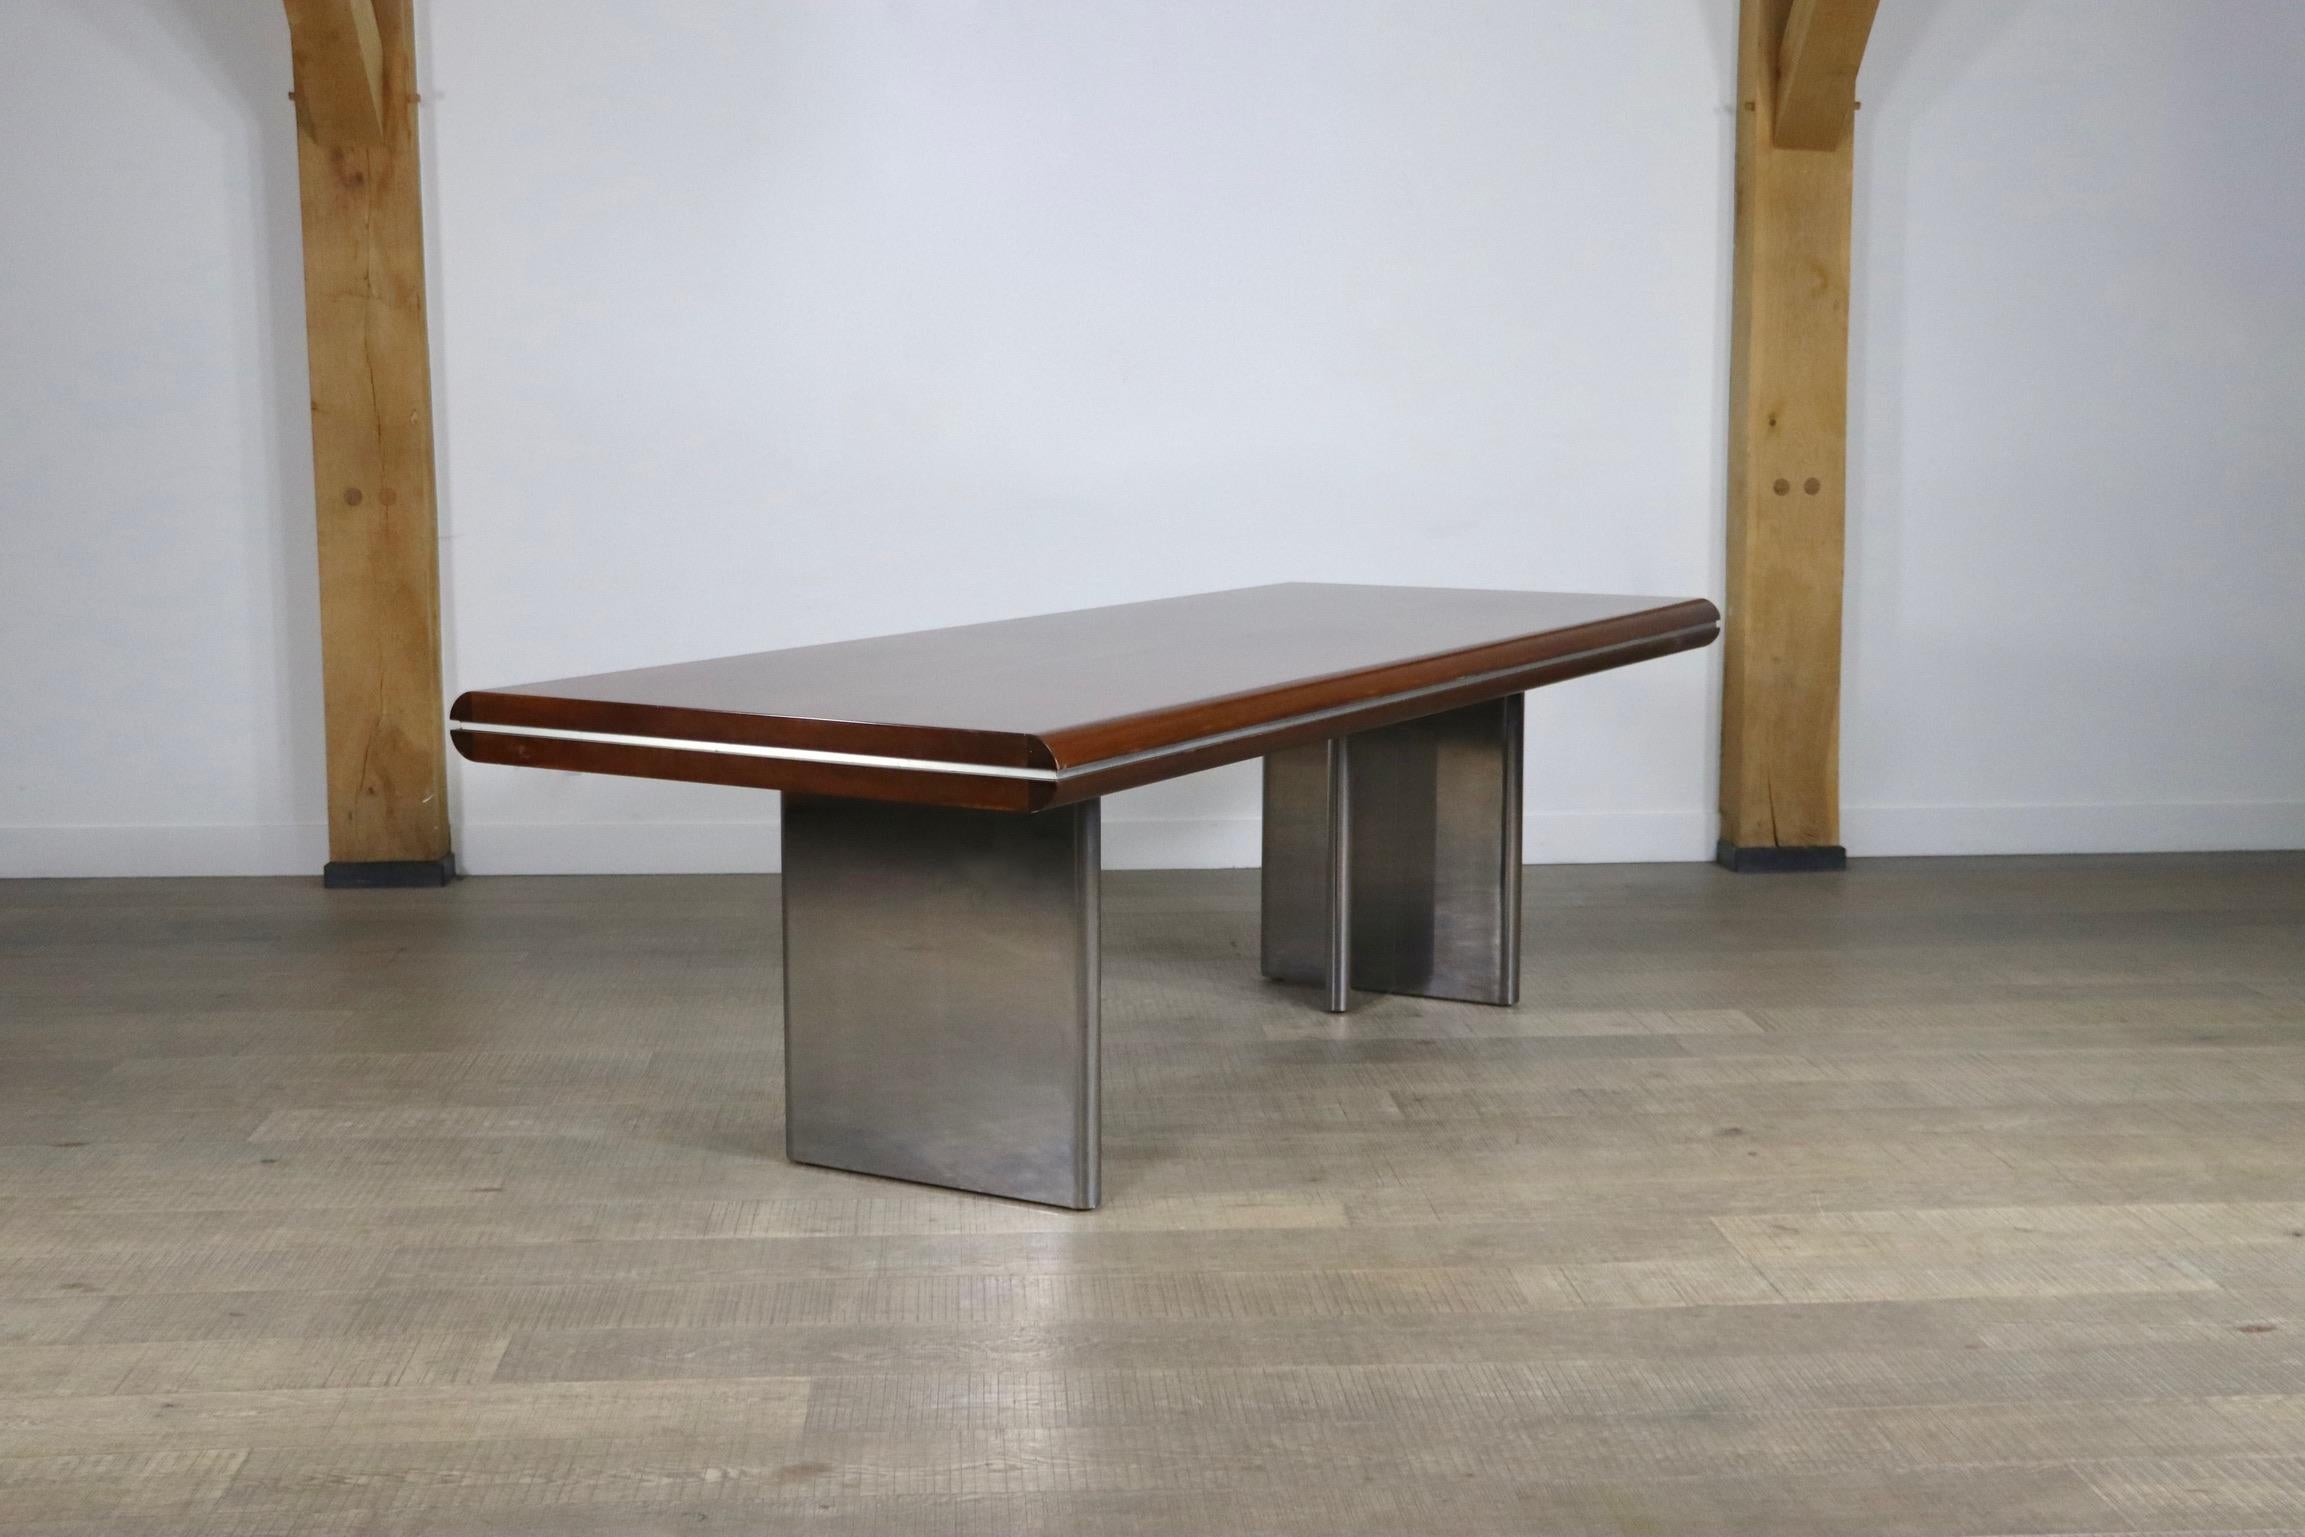 Chrome Rare Large Executive Desk By Hans Von Klier For Skipper, Italy 1970s For Sale